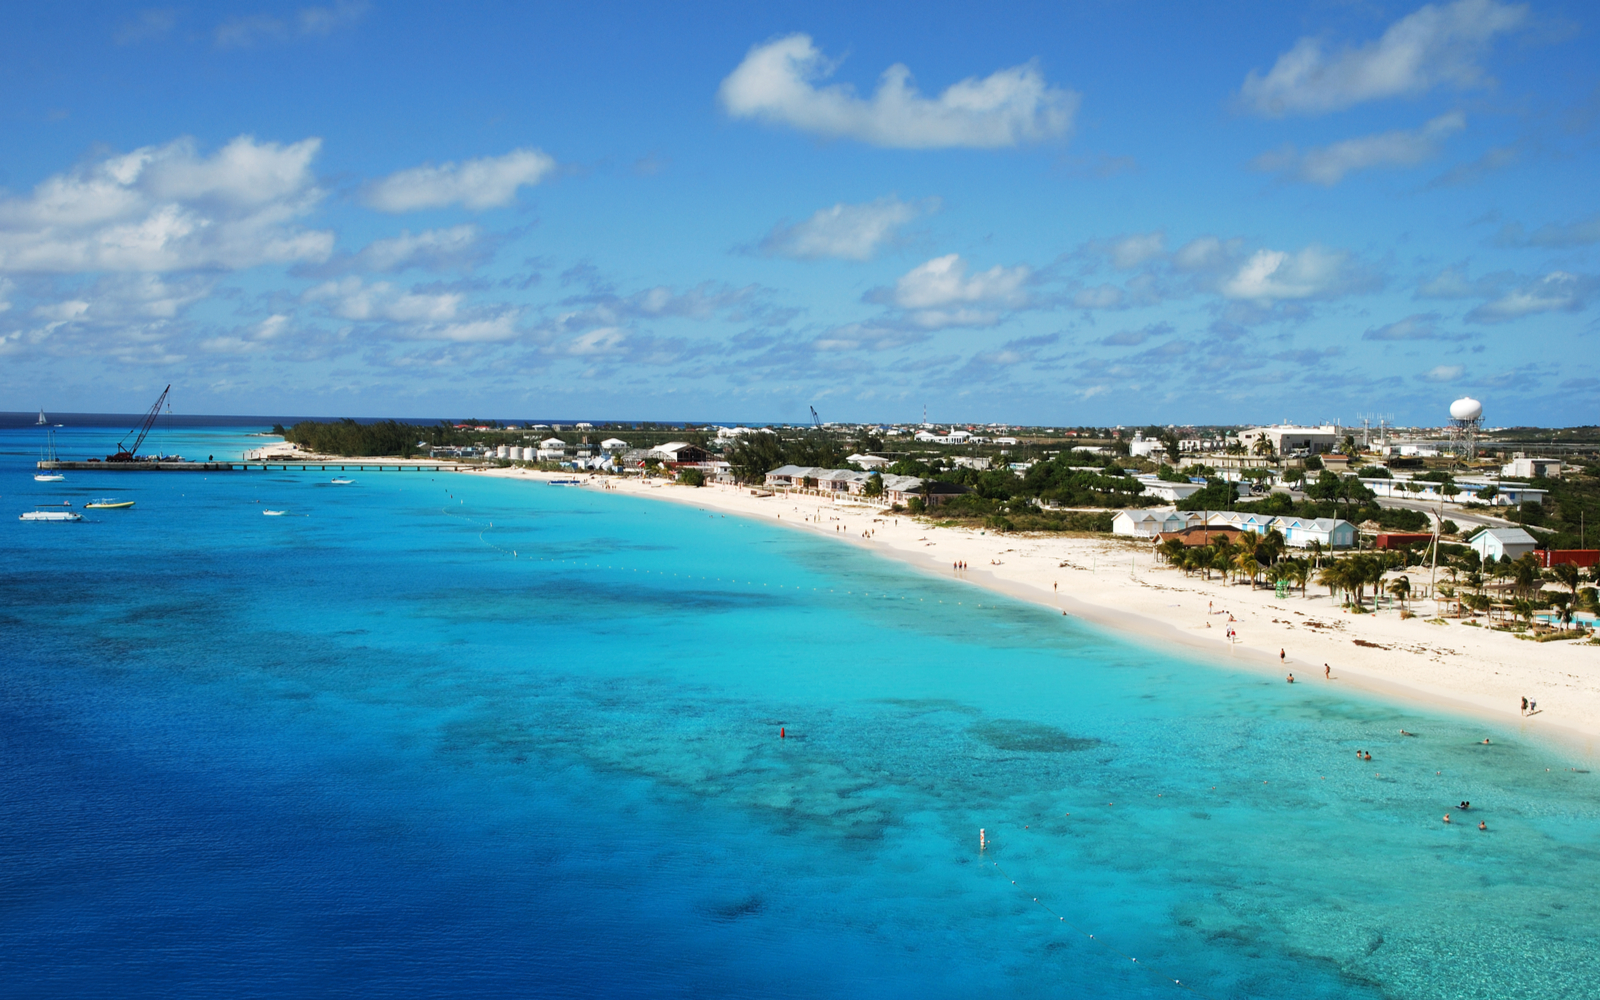 Where to Stay in Turks and Caicos in 2022